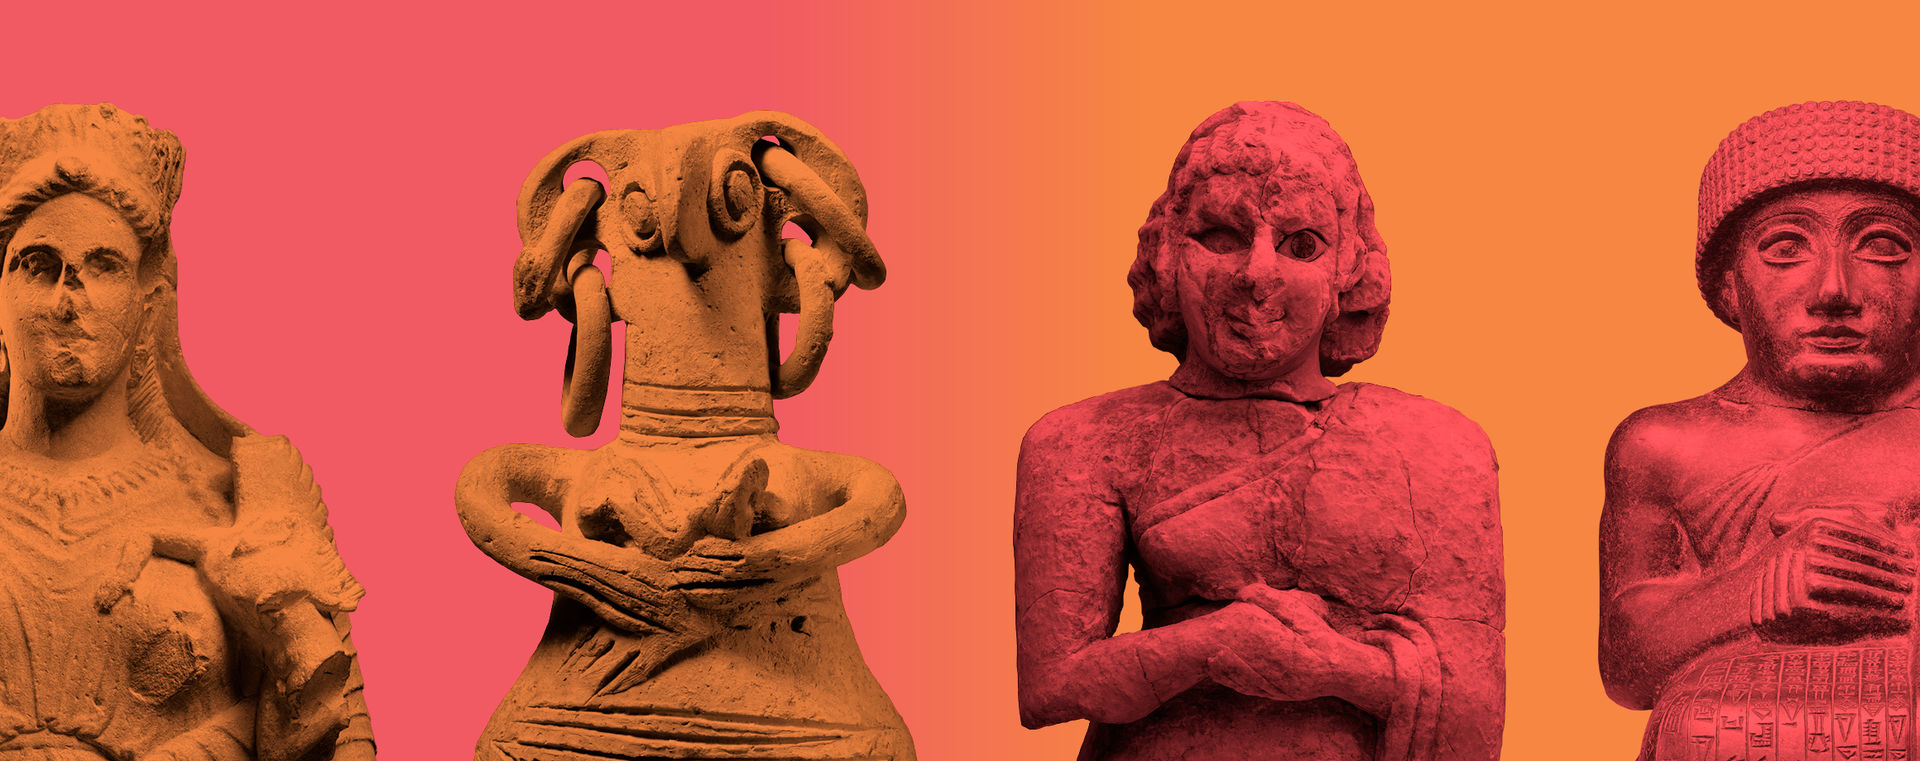 Pink and orange gradient background with stone human and anthropomorphic figures' torsos